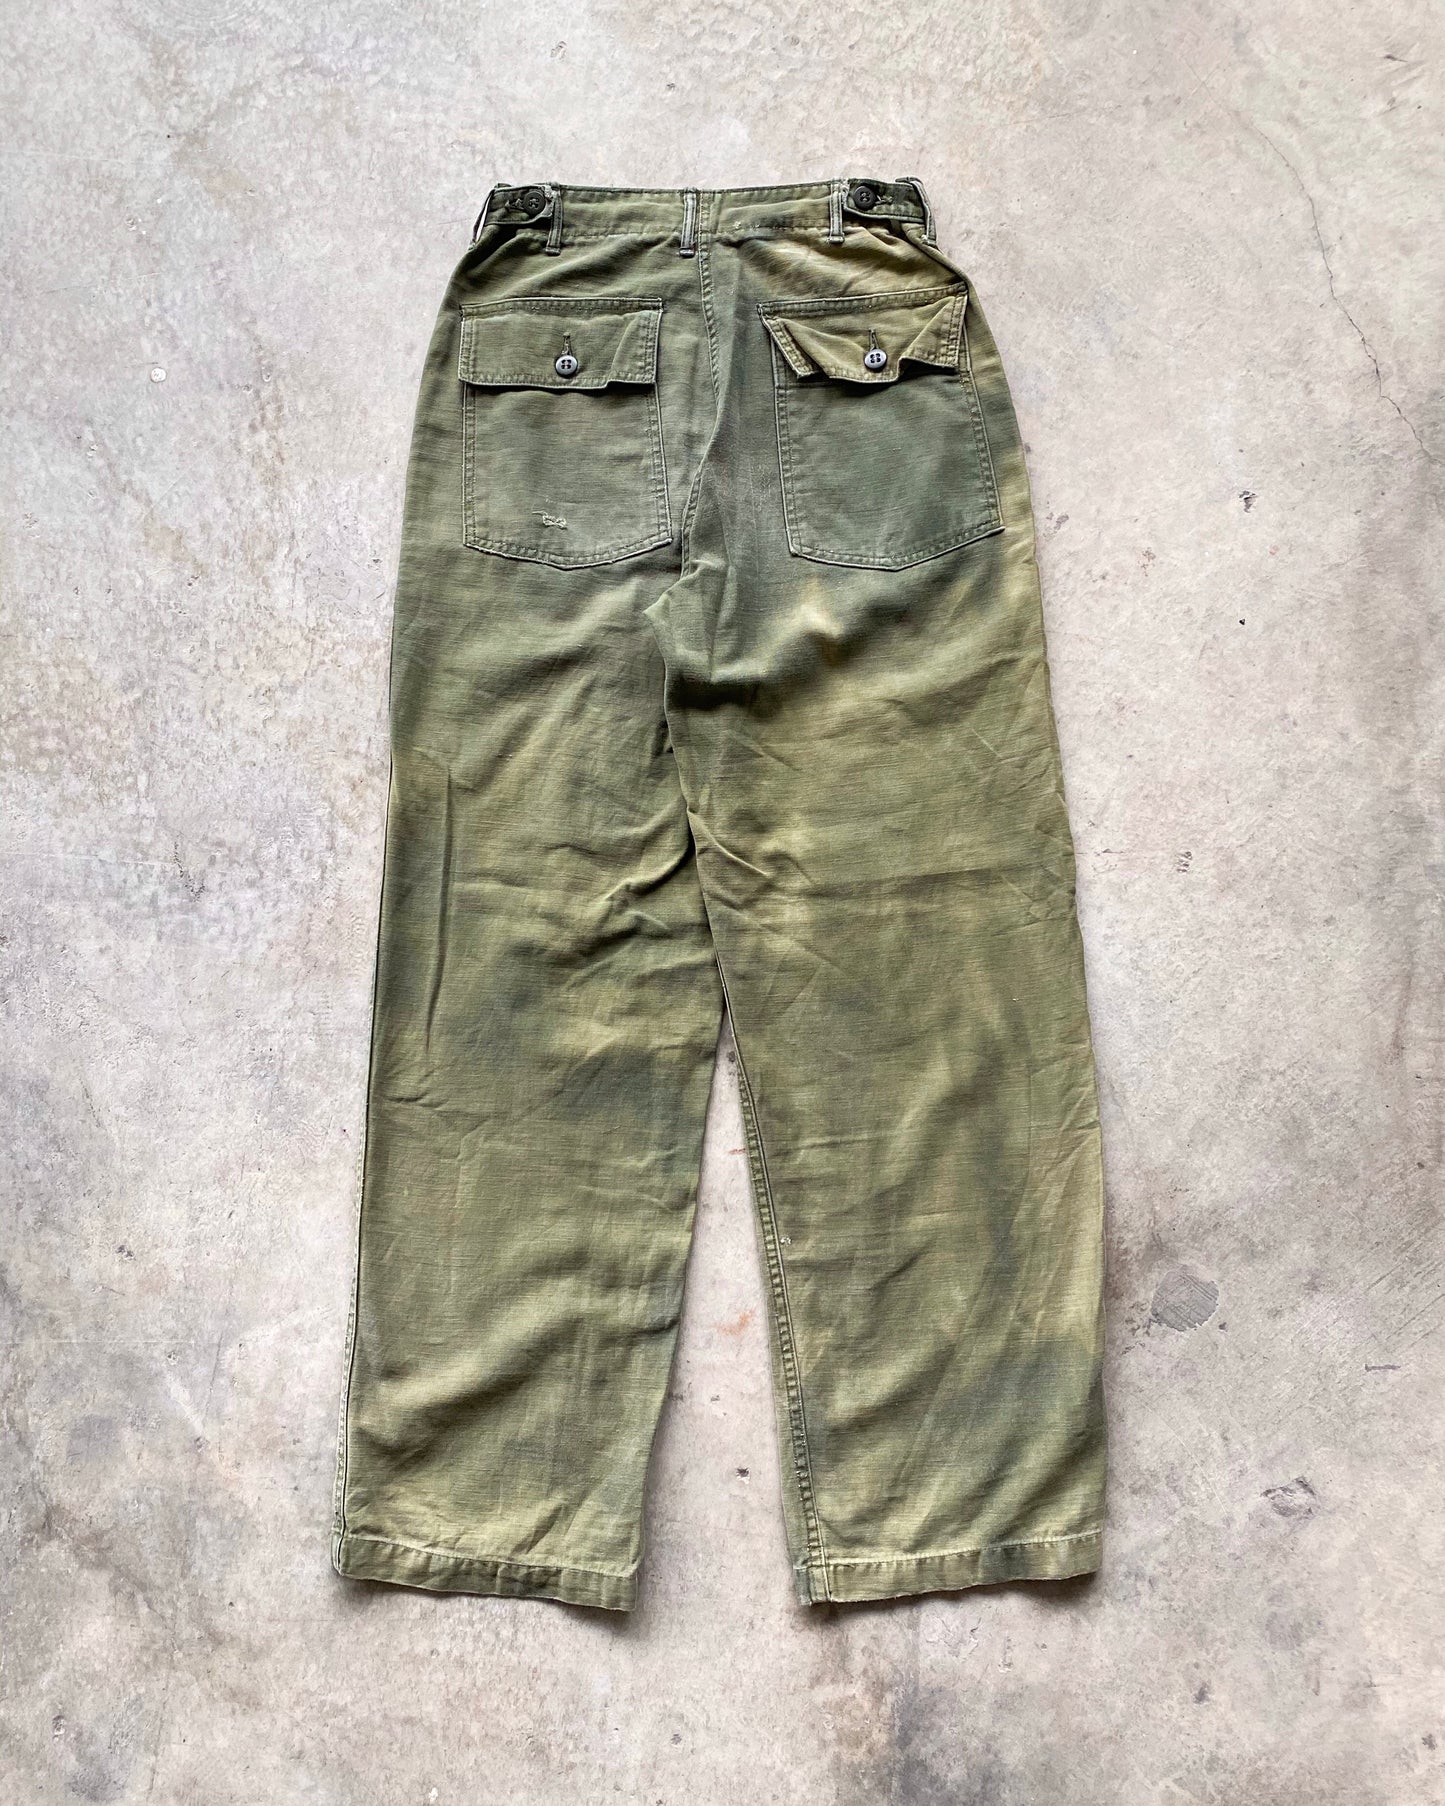 1960S SUN FADED OG-107 TYPE 1 FATIGUE TROUSERS (28-32)